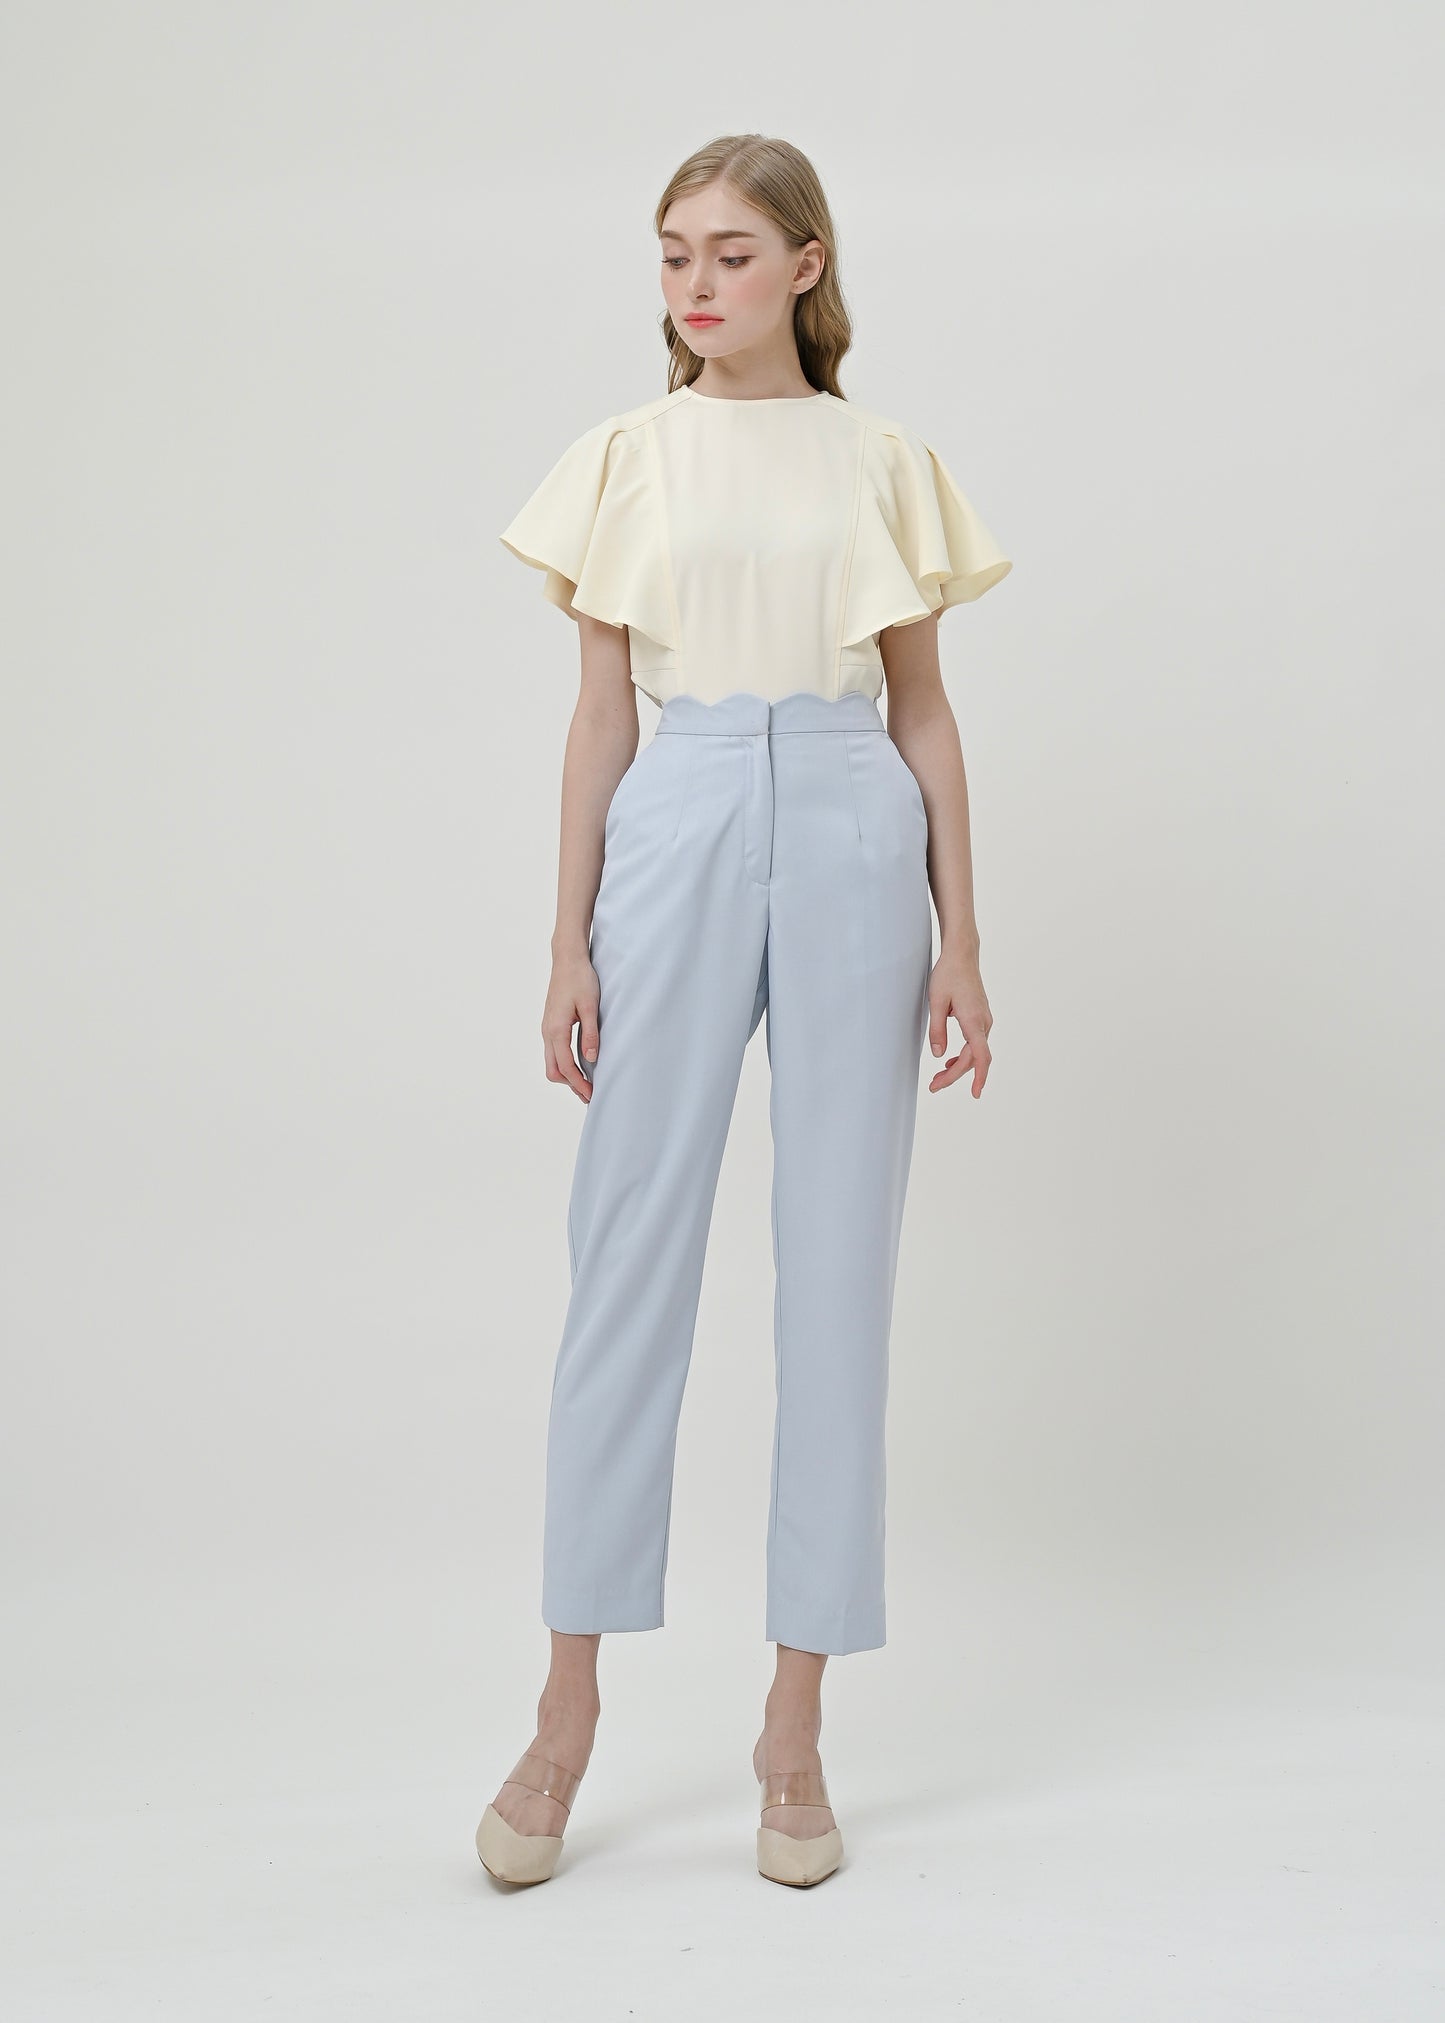 Polly Scalloped Trouser